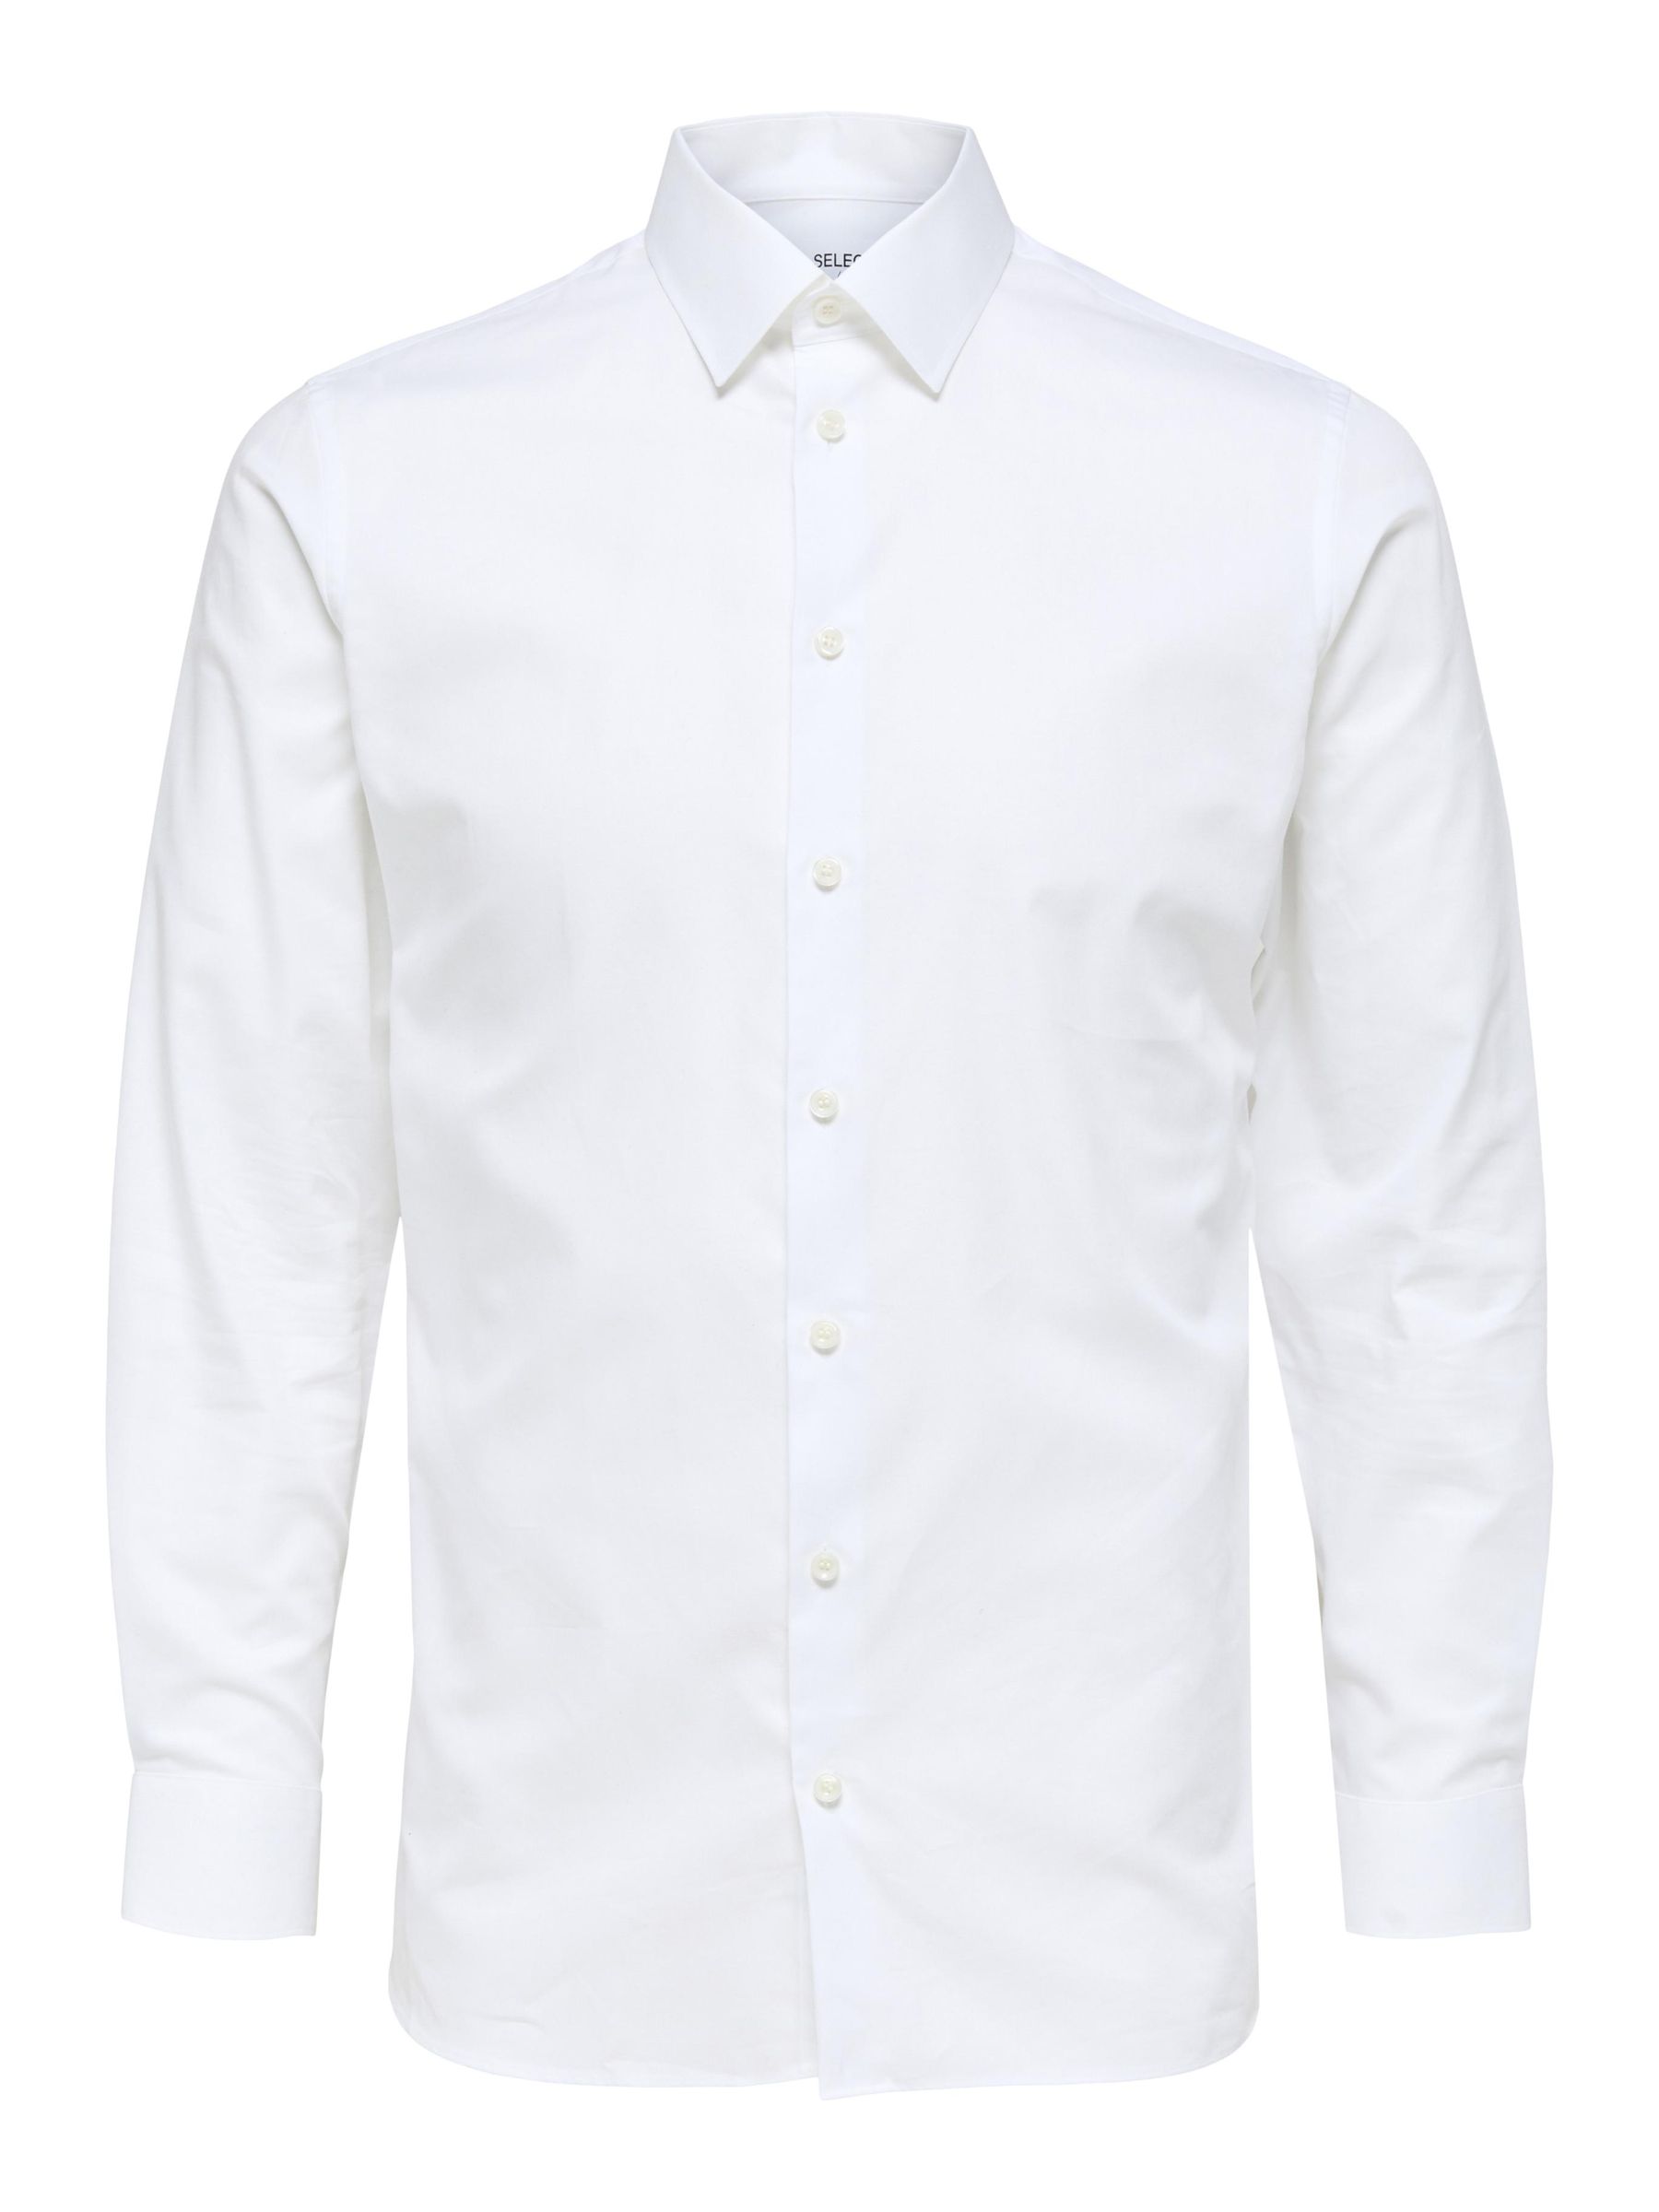 LONG-SLEEVED SLIM | HOMME® White SHIRT | SELECTED FIT